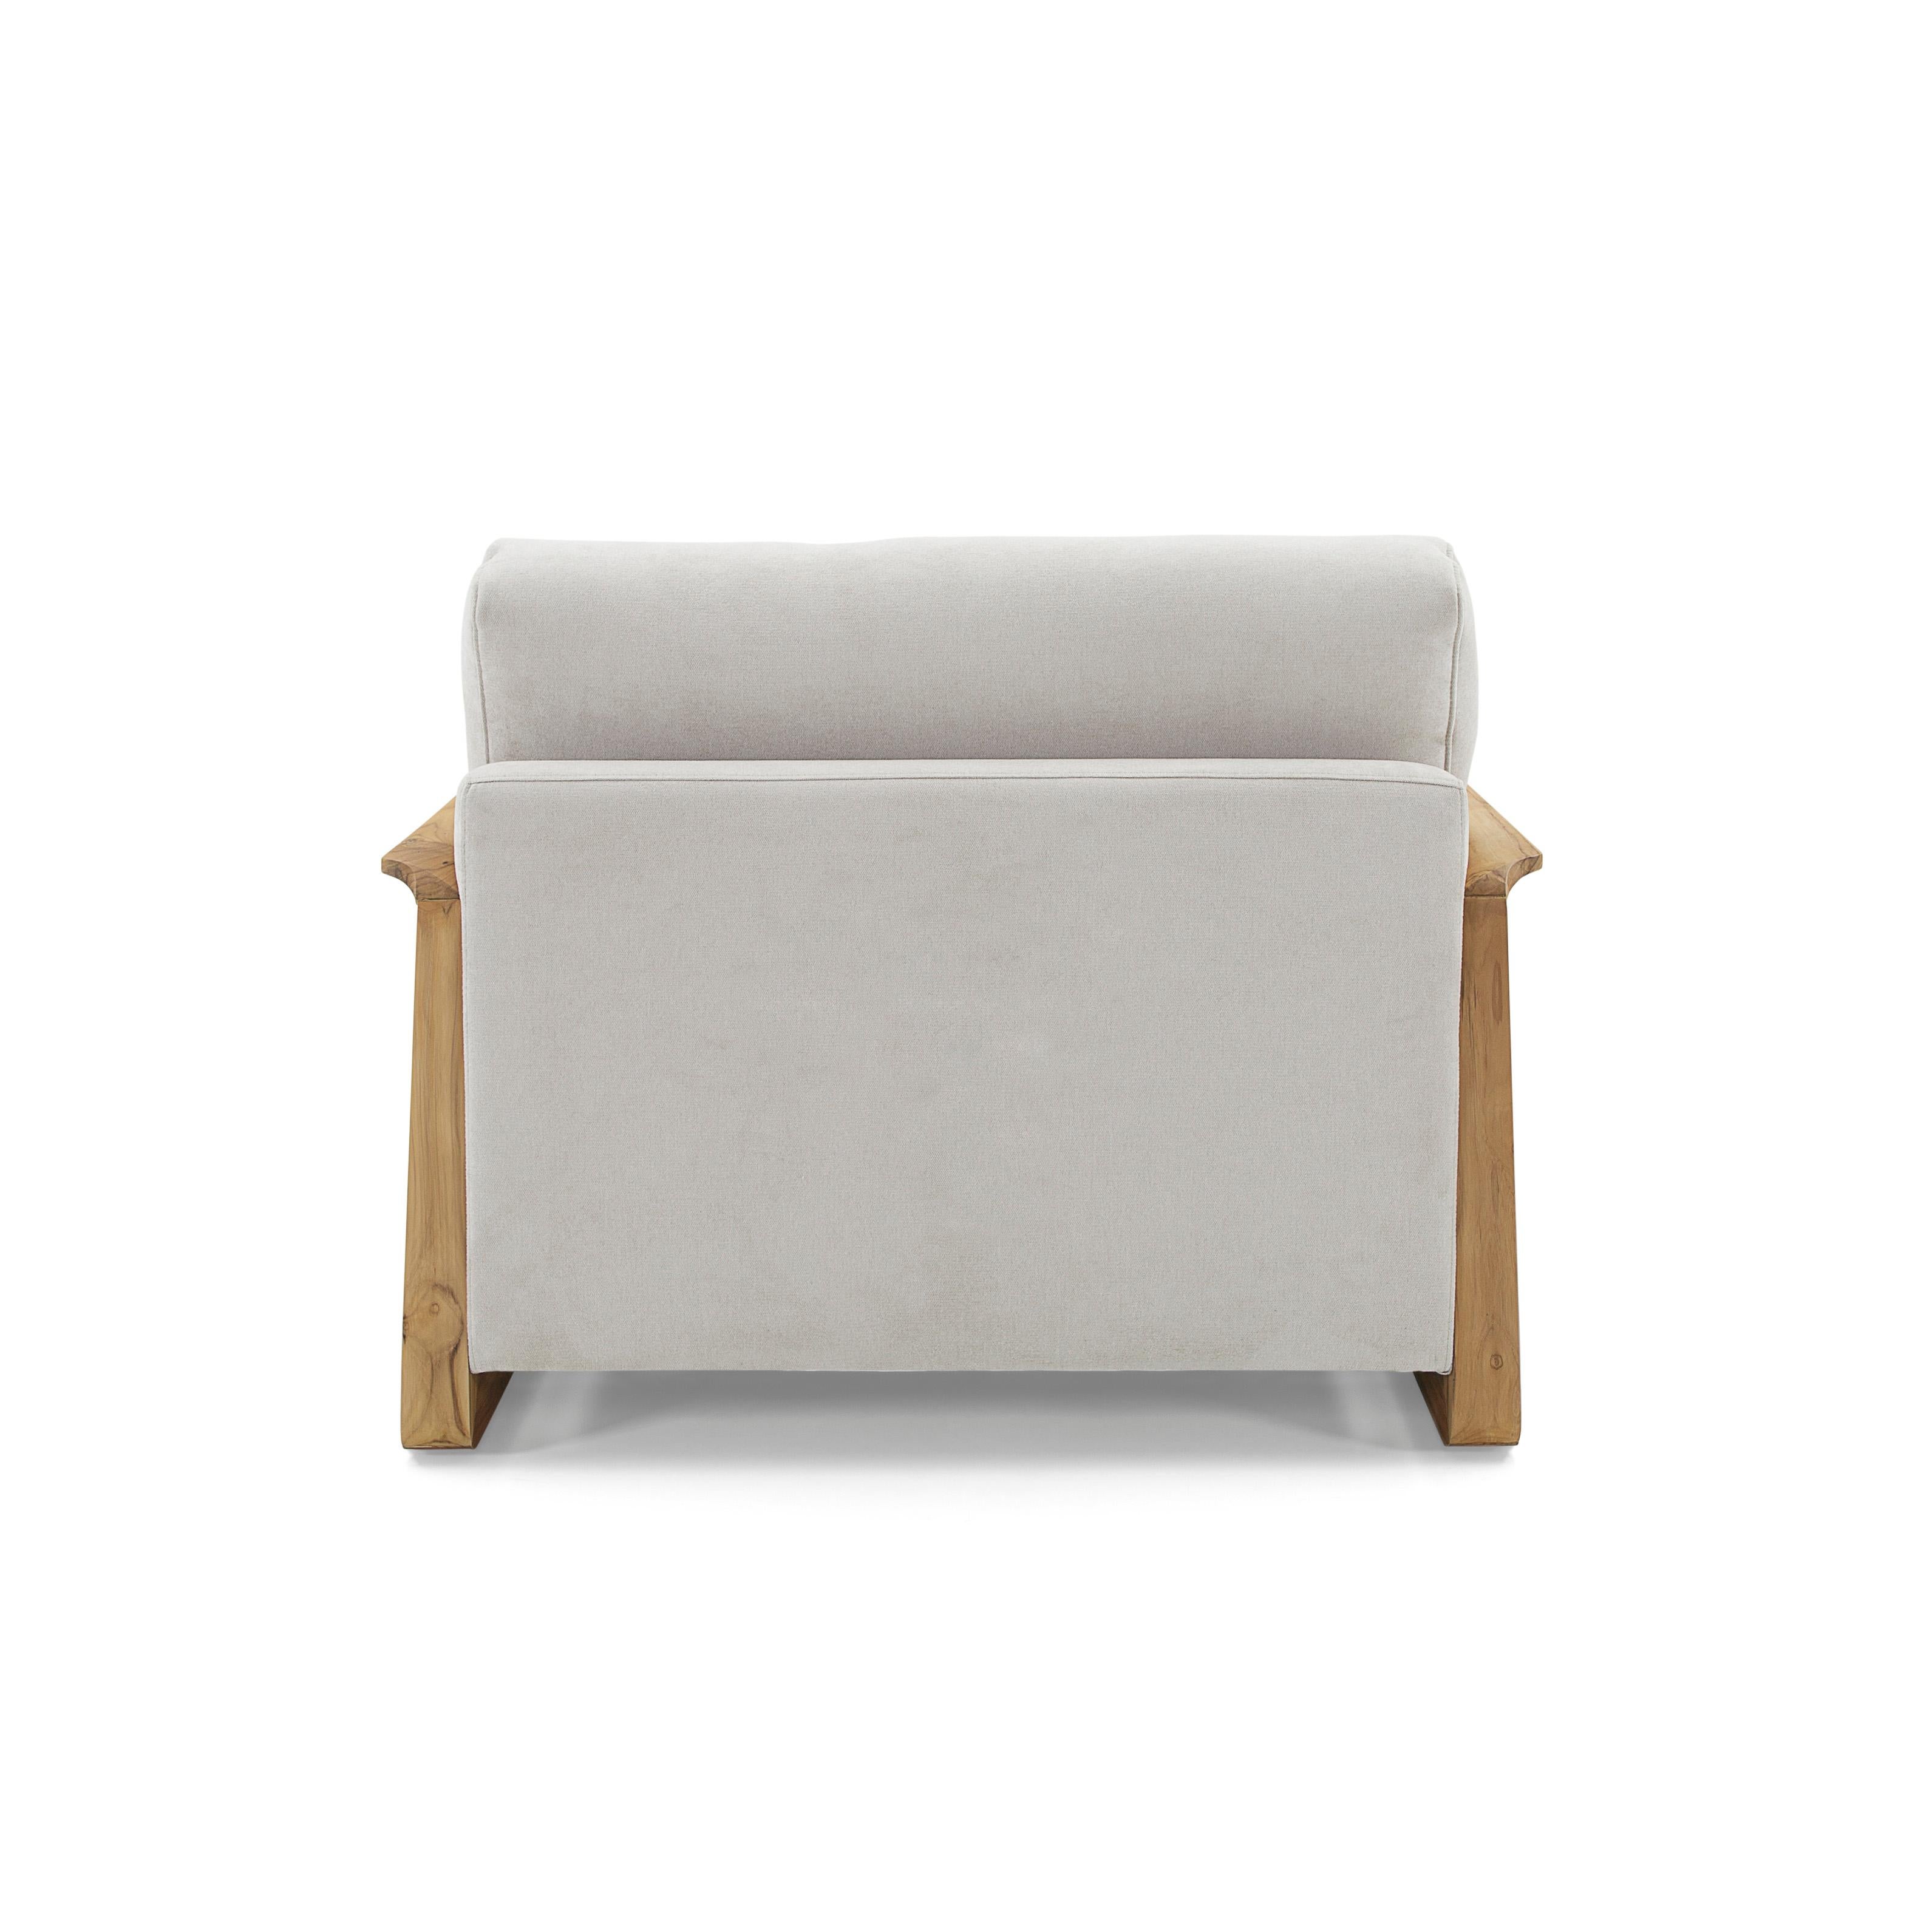 Brazilian Fine Armchair Upholstered in an Oatmeal Fabric with Teak Wood Arms For Sale